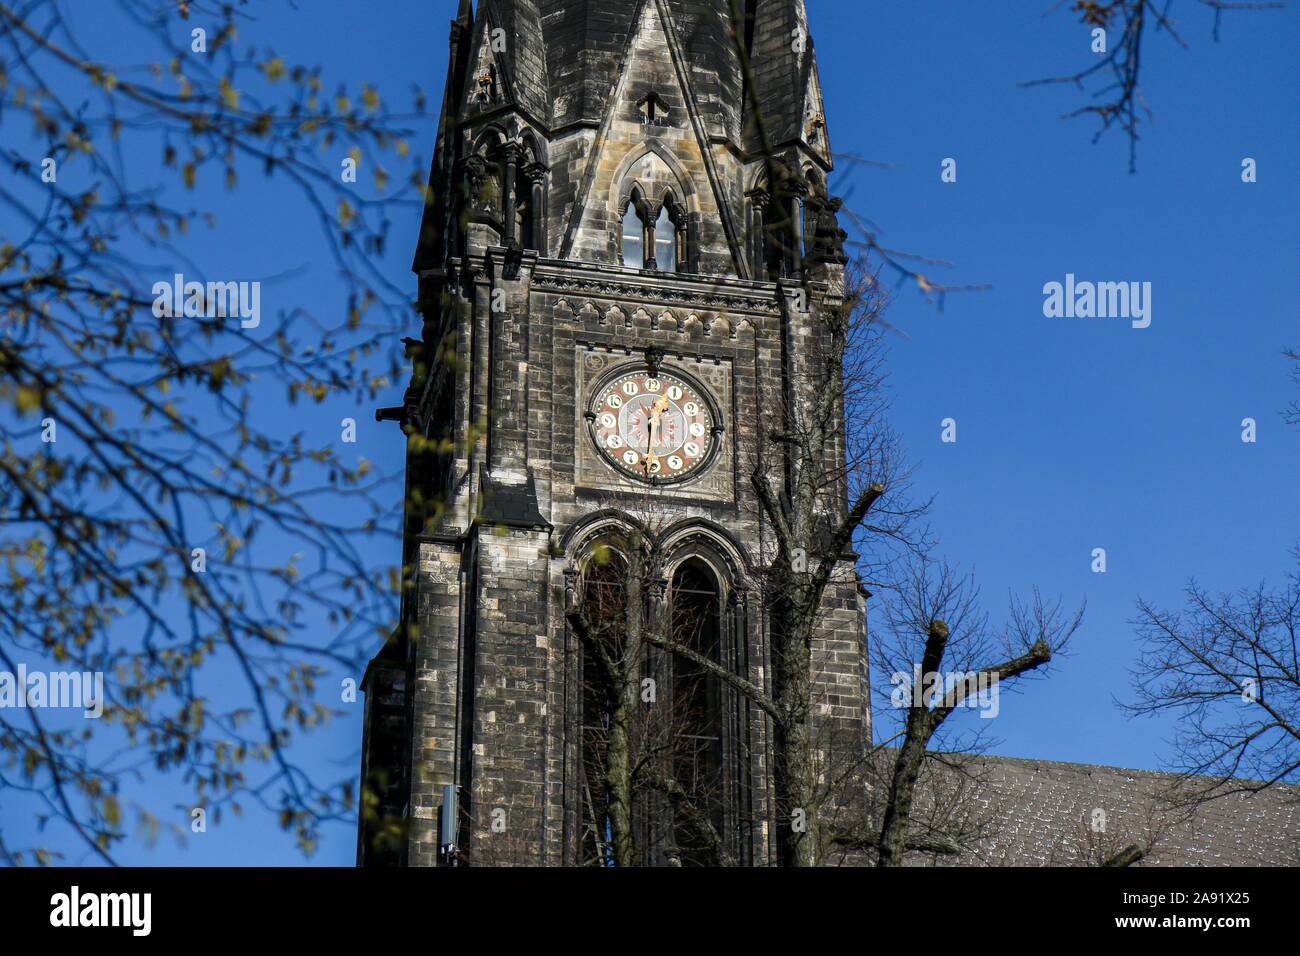 BERLIN - MARCH 3, 2014: Church Spire with clock of the neo-gothic Kirche am Suedstern in Kreuzberg. Was build 1894 to 1897. Stock Photo